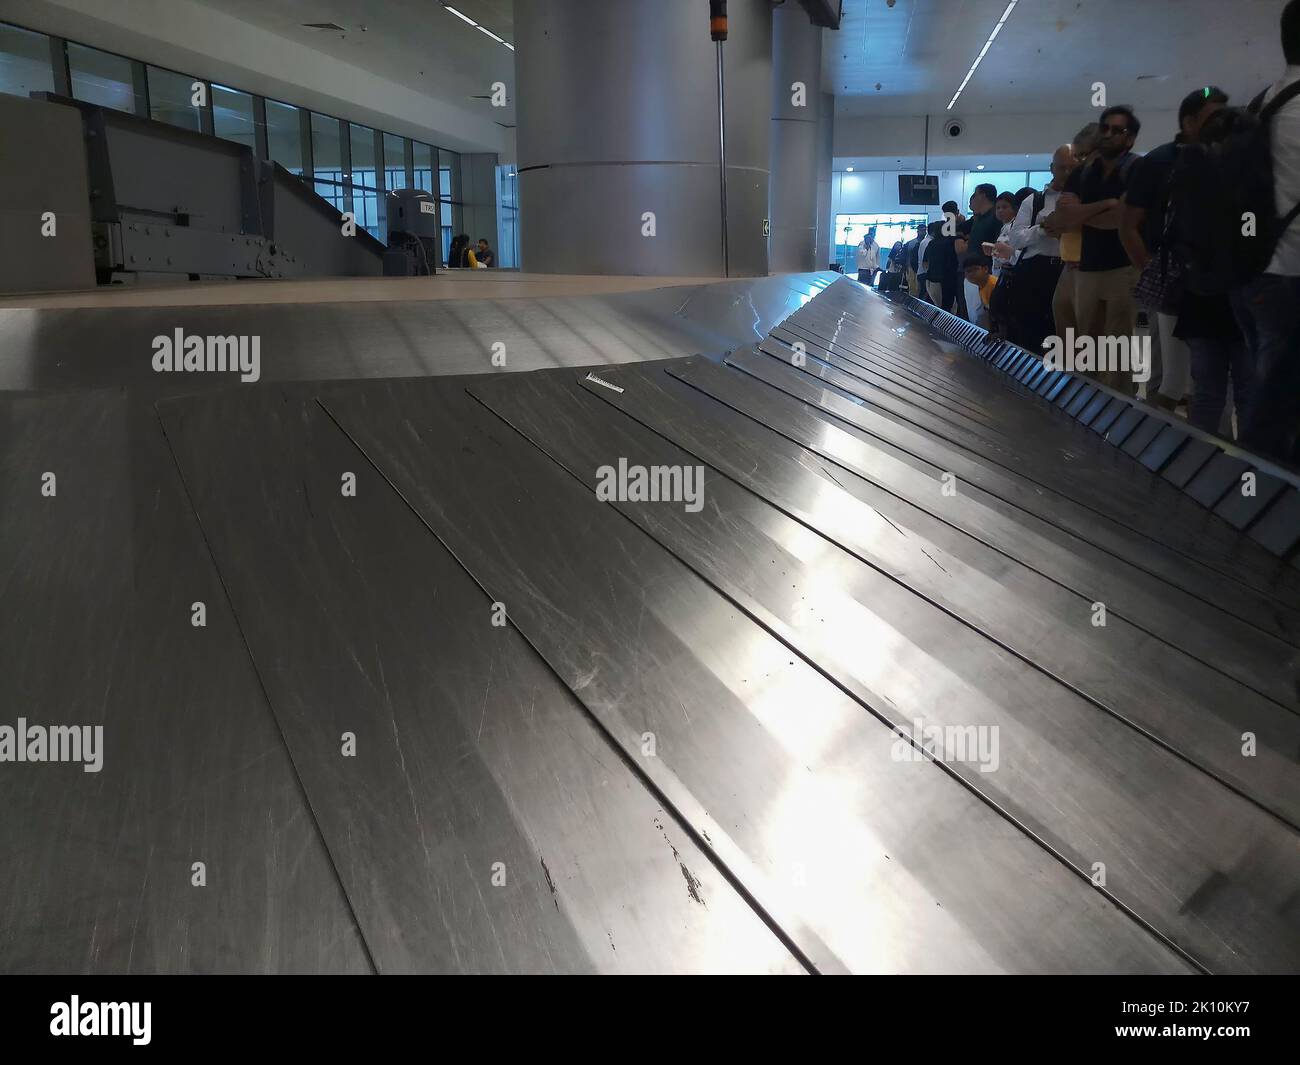 Delhi , India - 14th May 2019 : Close up view of automated airport luggage belt in motion, passengers are waiting for their luggages beside empty belt Stock Photo